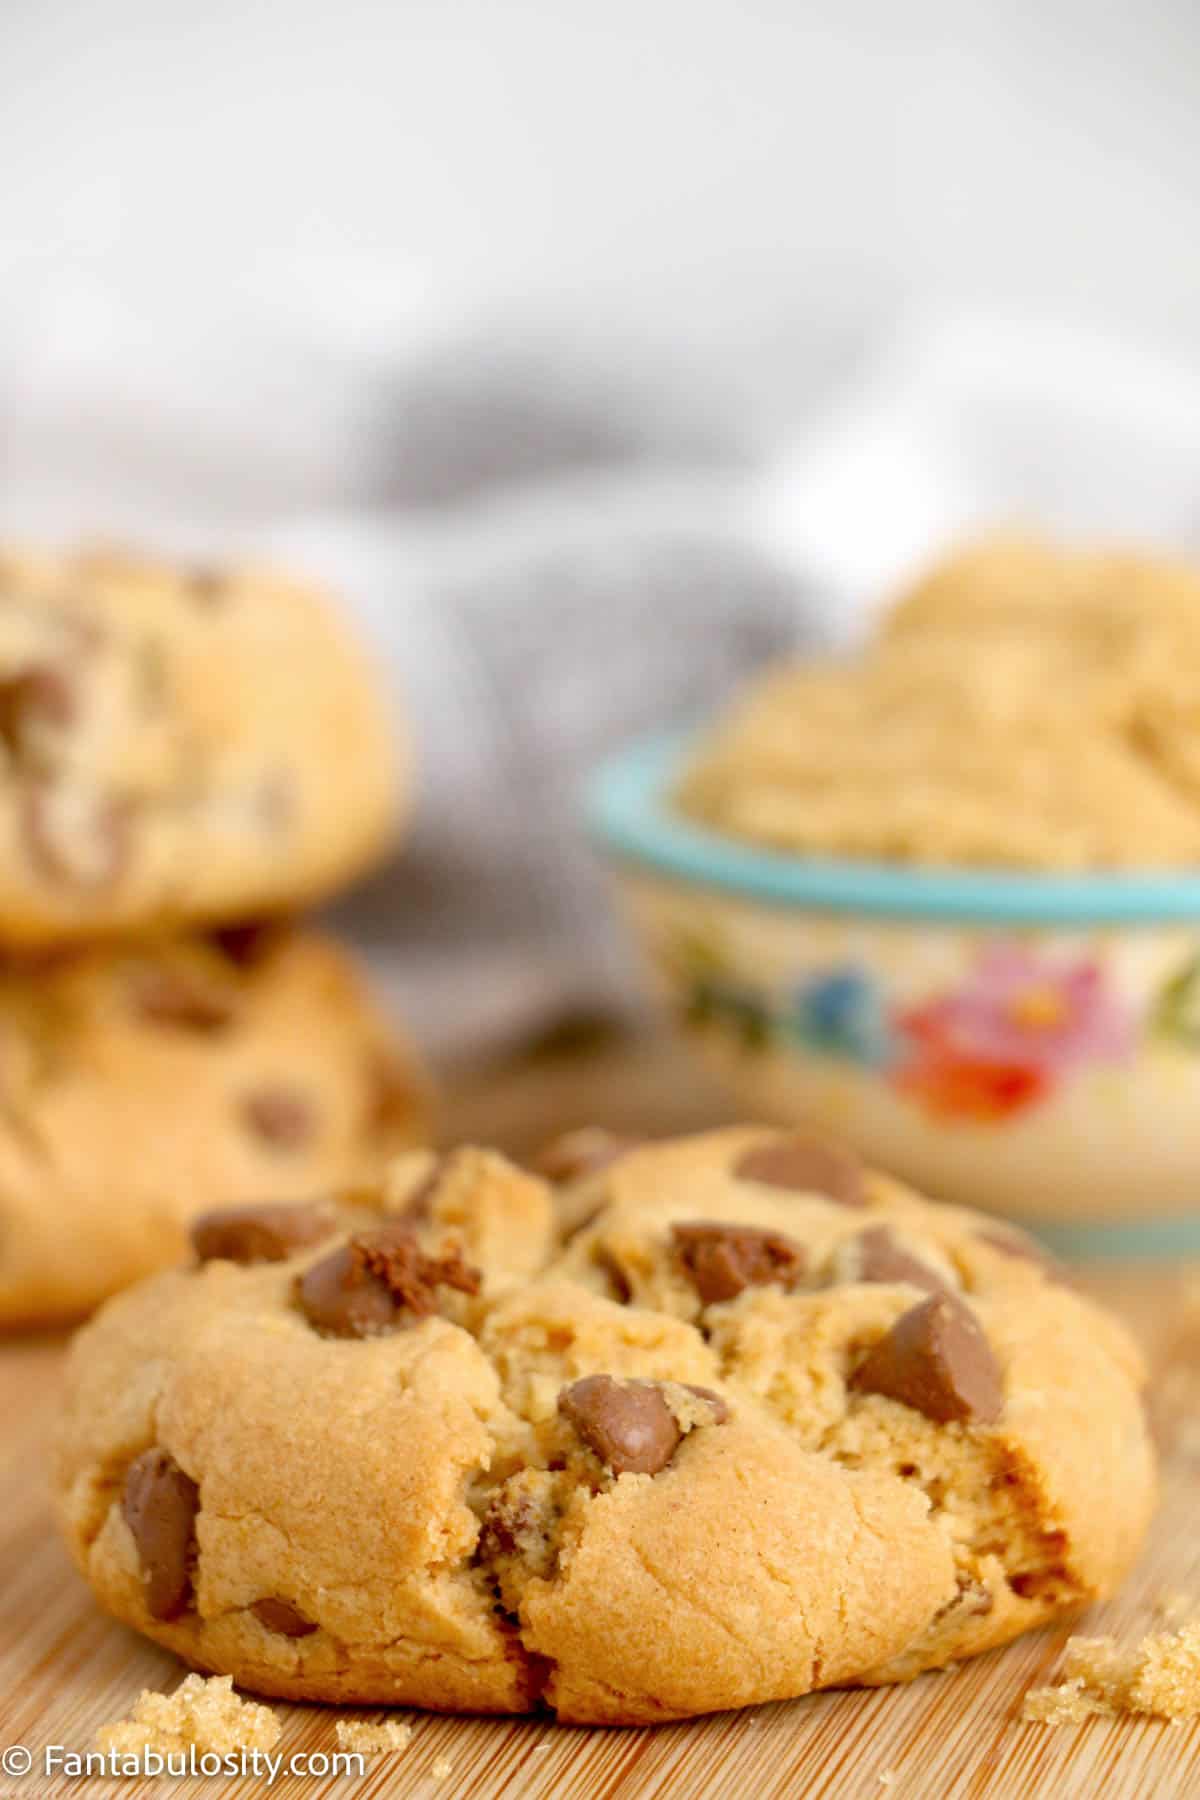 Big fat chewy chocolate chip cookies.